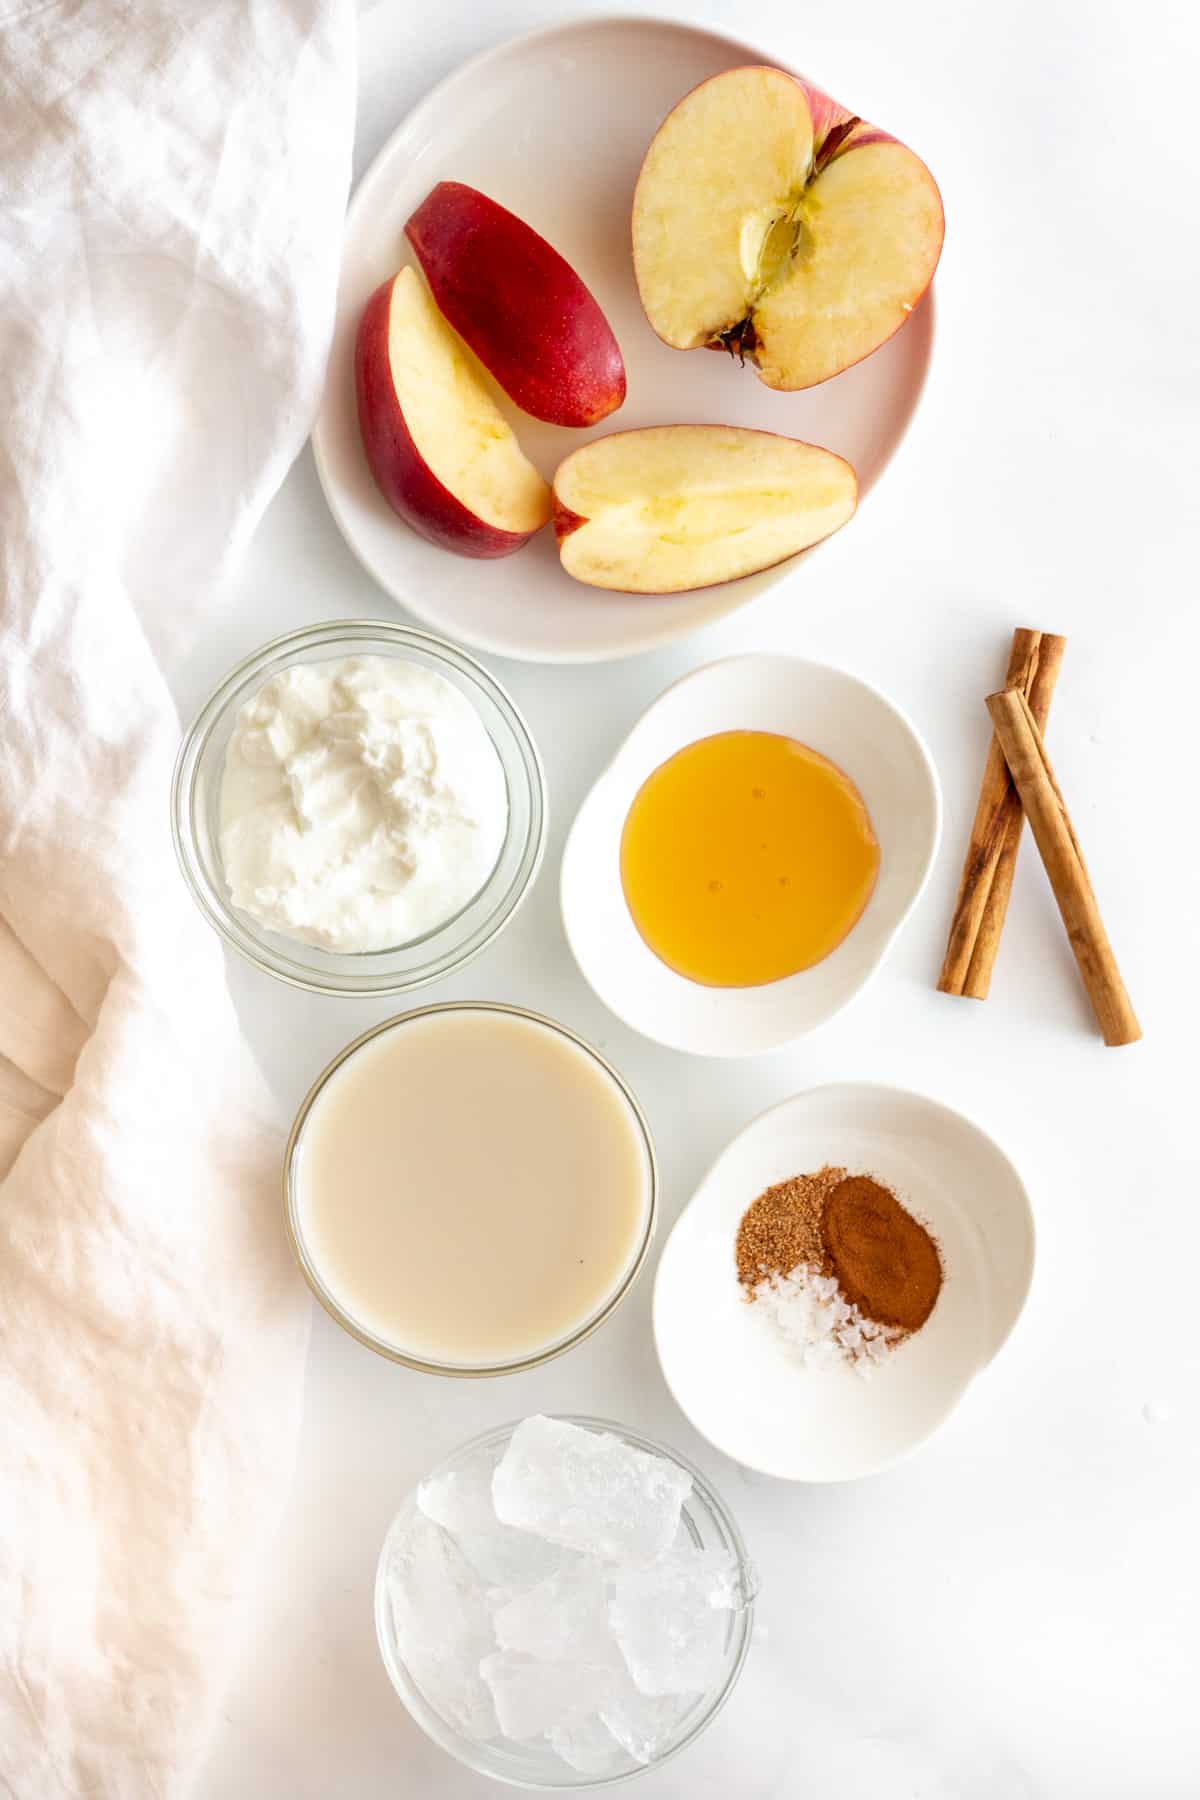 Ingredients for Apple Pie Smoothie